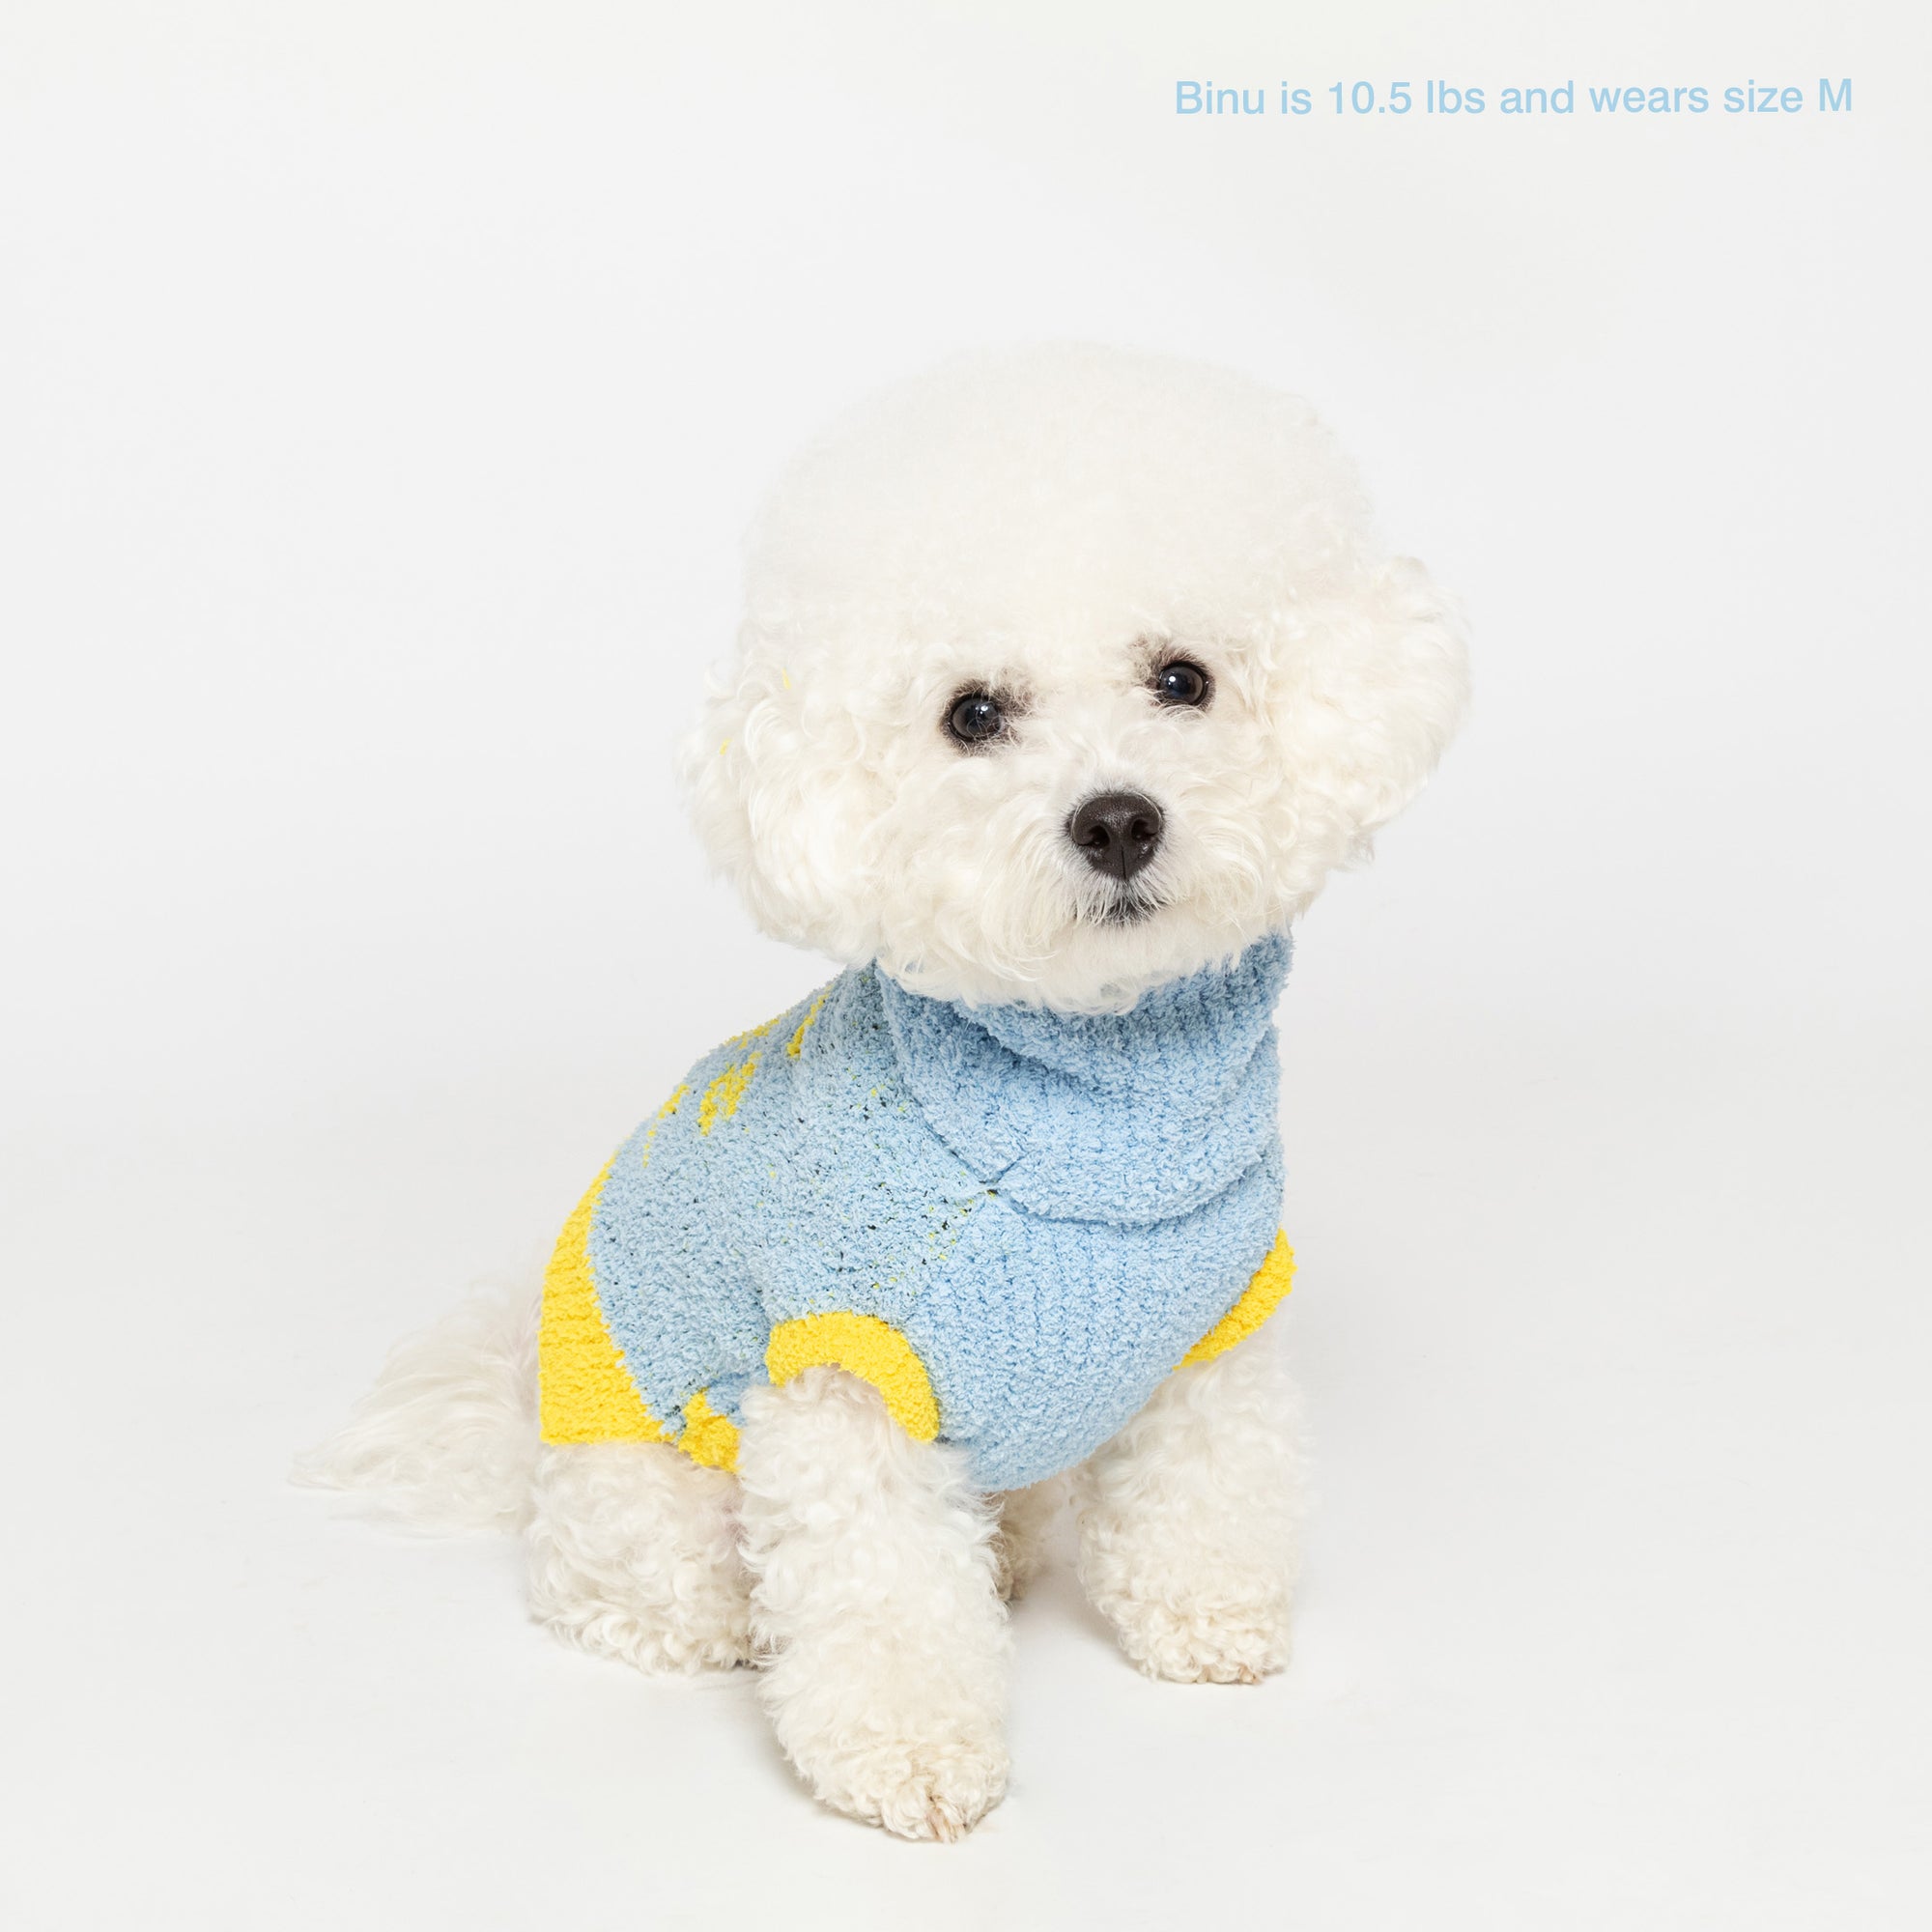  Bichon Frise named Binu, 10.5 lbs, in medium-sized blue "The Furryfolks" sweater, poses on a white background.